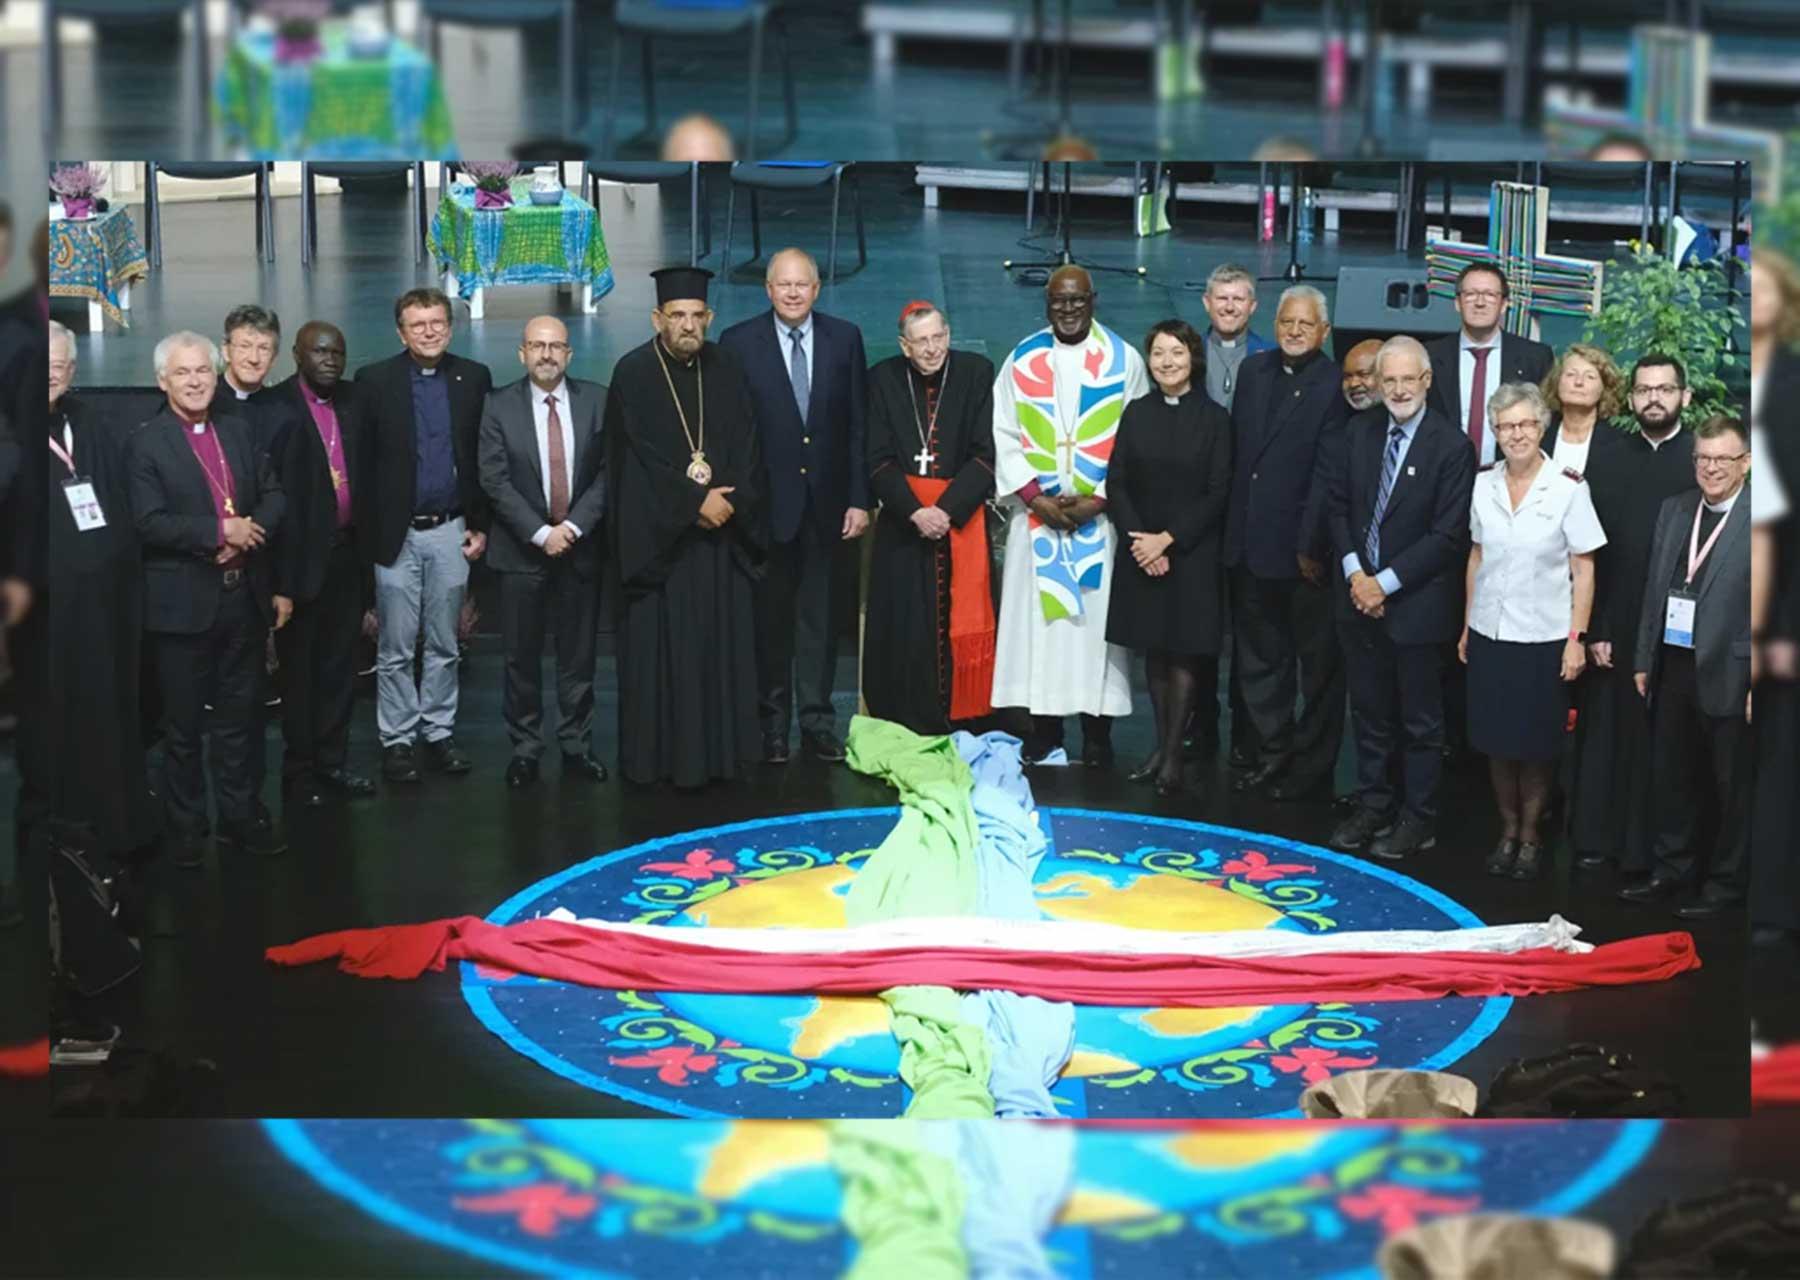 LWF leaders with the ecumenical guests taking part in a panel discussion on the closing day of the LWF Thirteenth Assembly in Krakow, Poland. Photo: LWF/M. Renaux